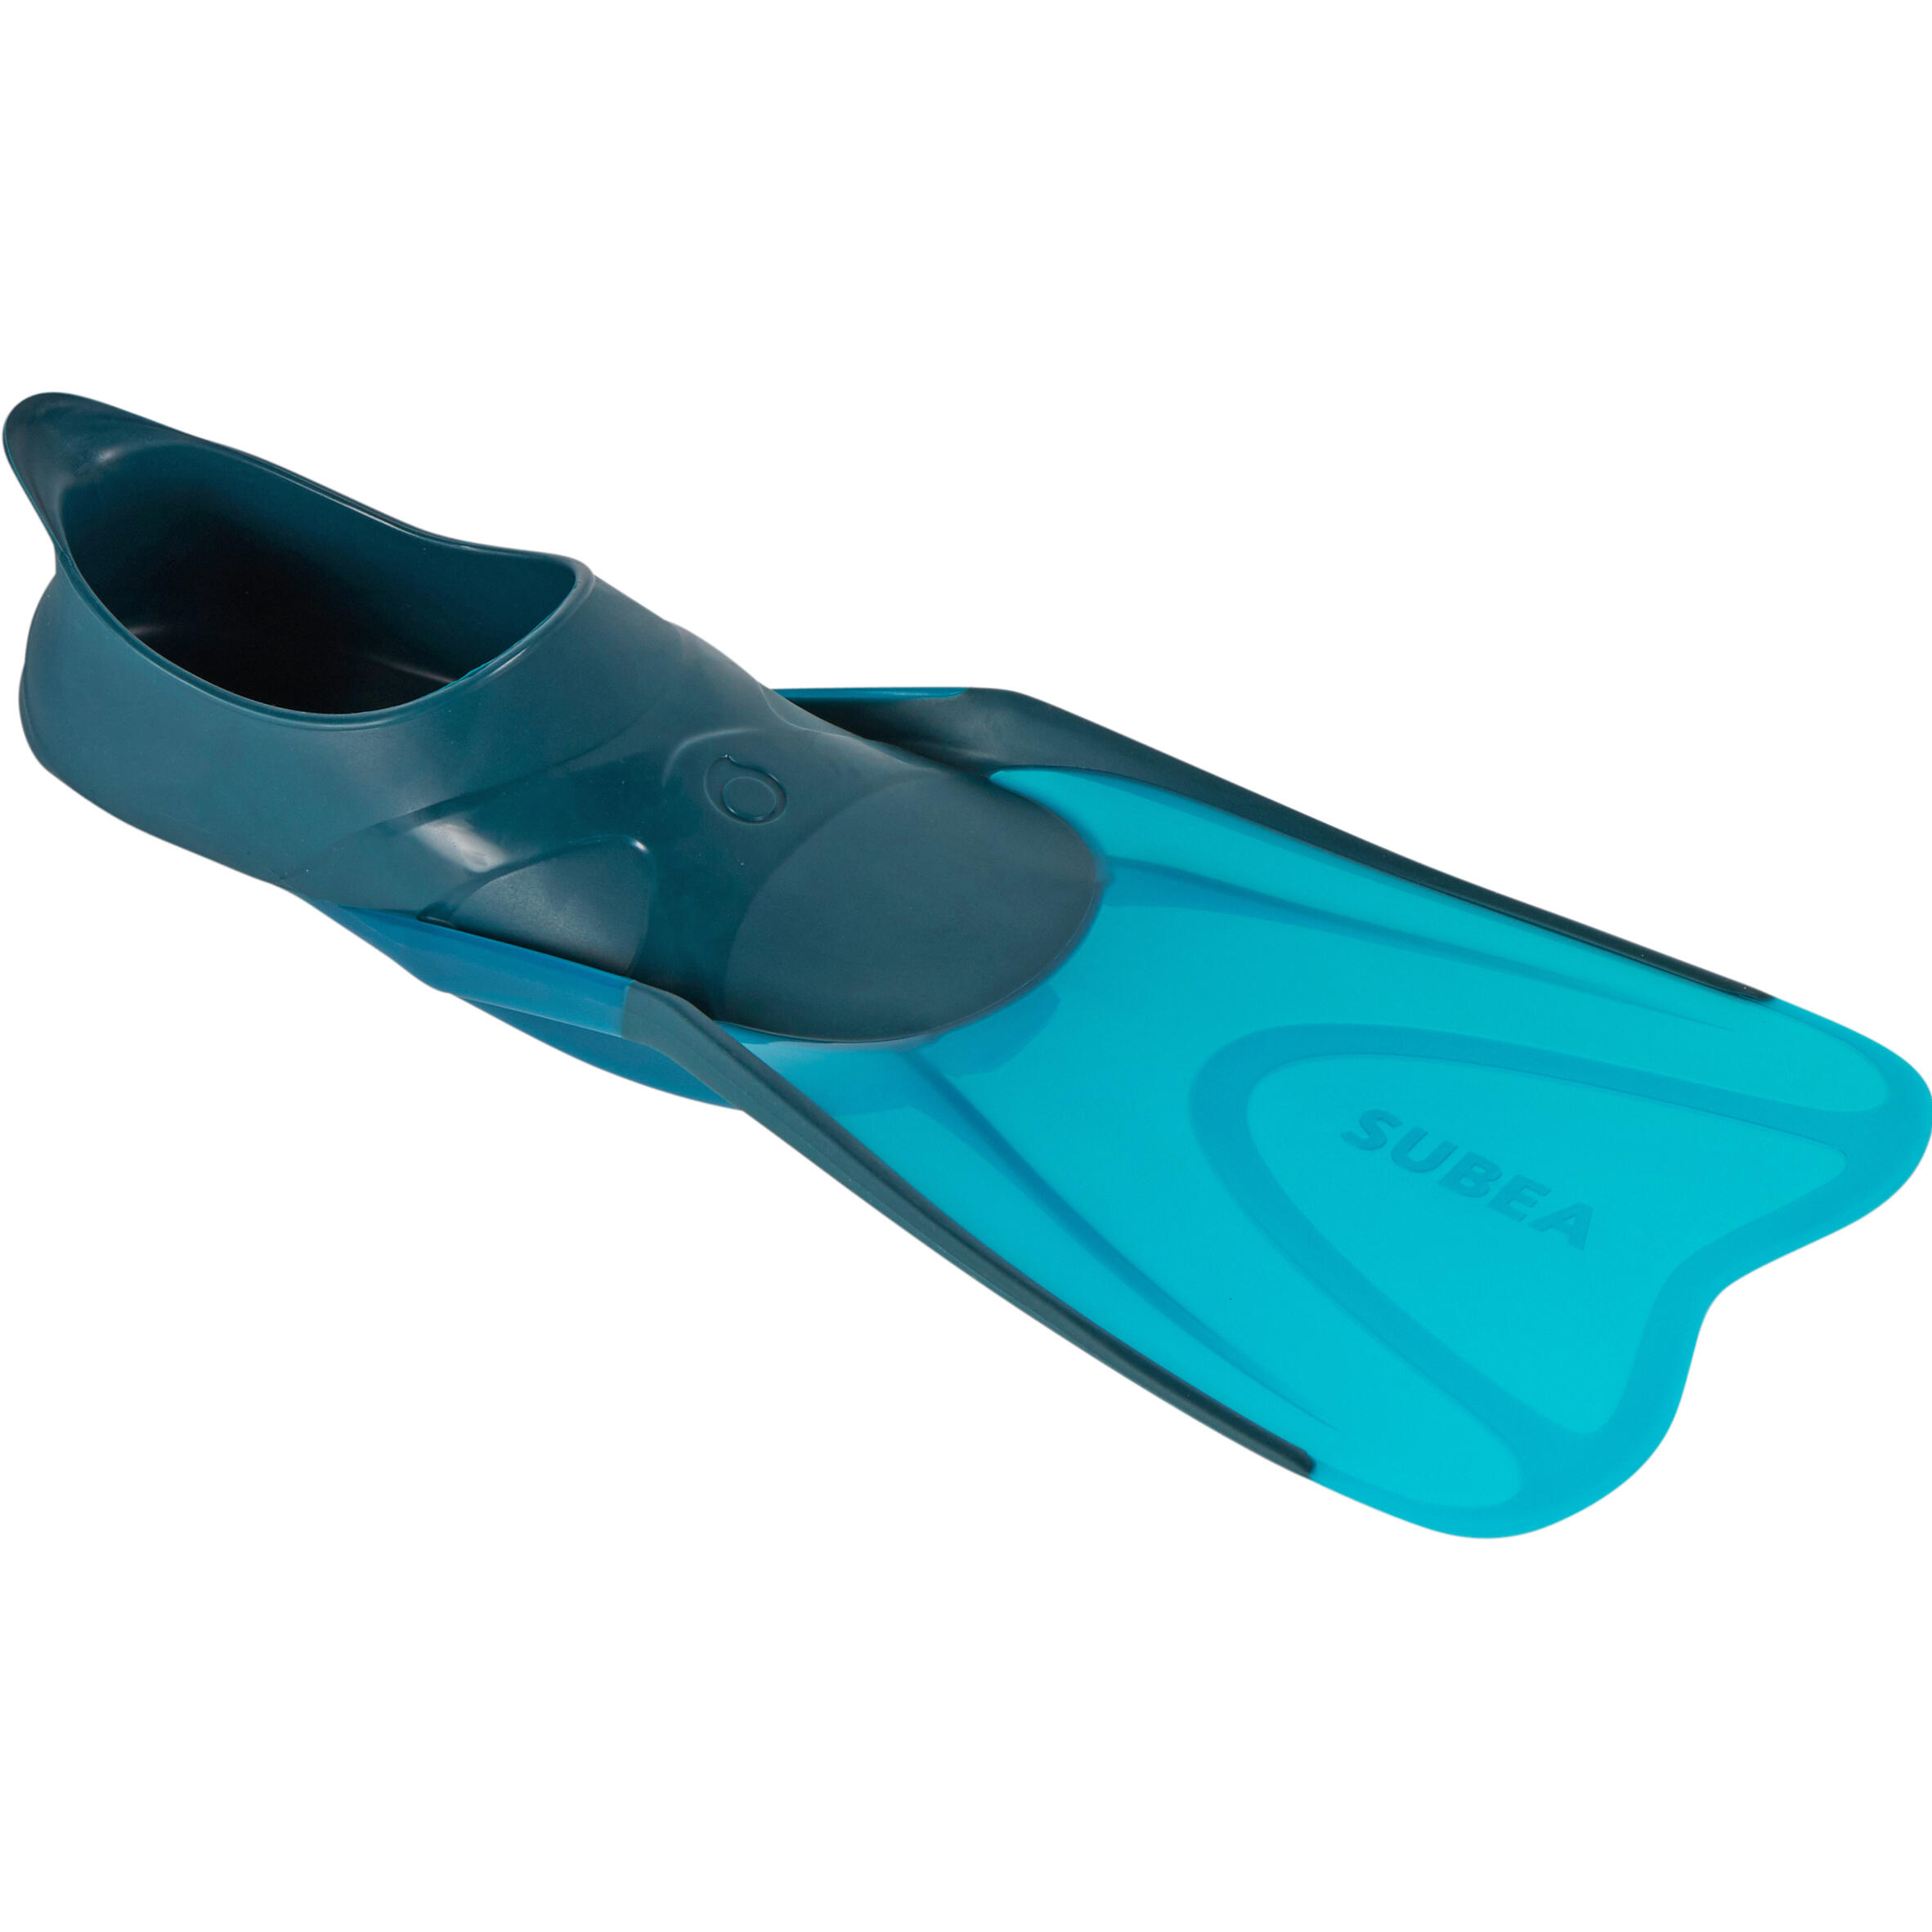 520 Adult Snorkelling Fins - Black and 